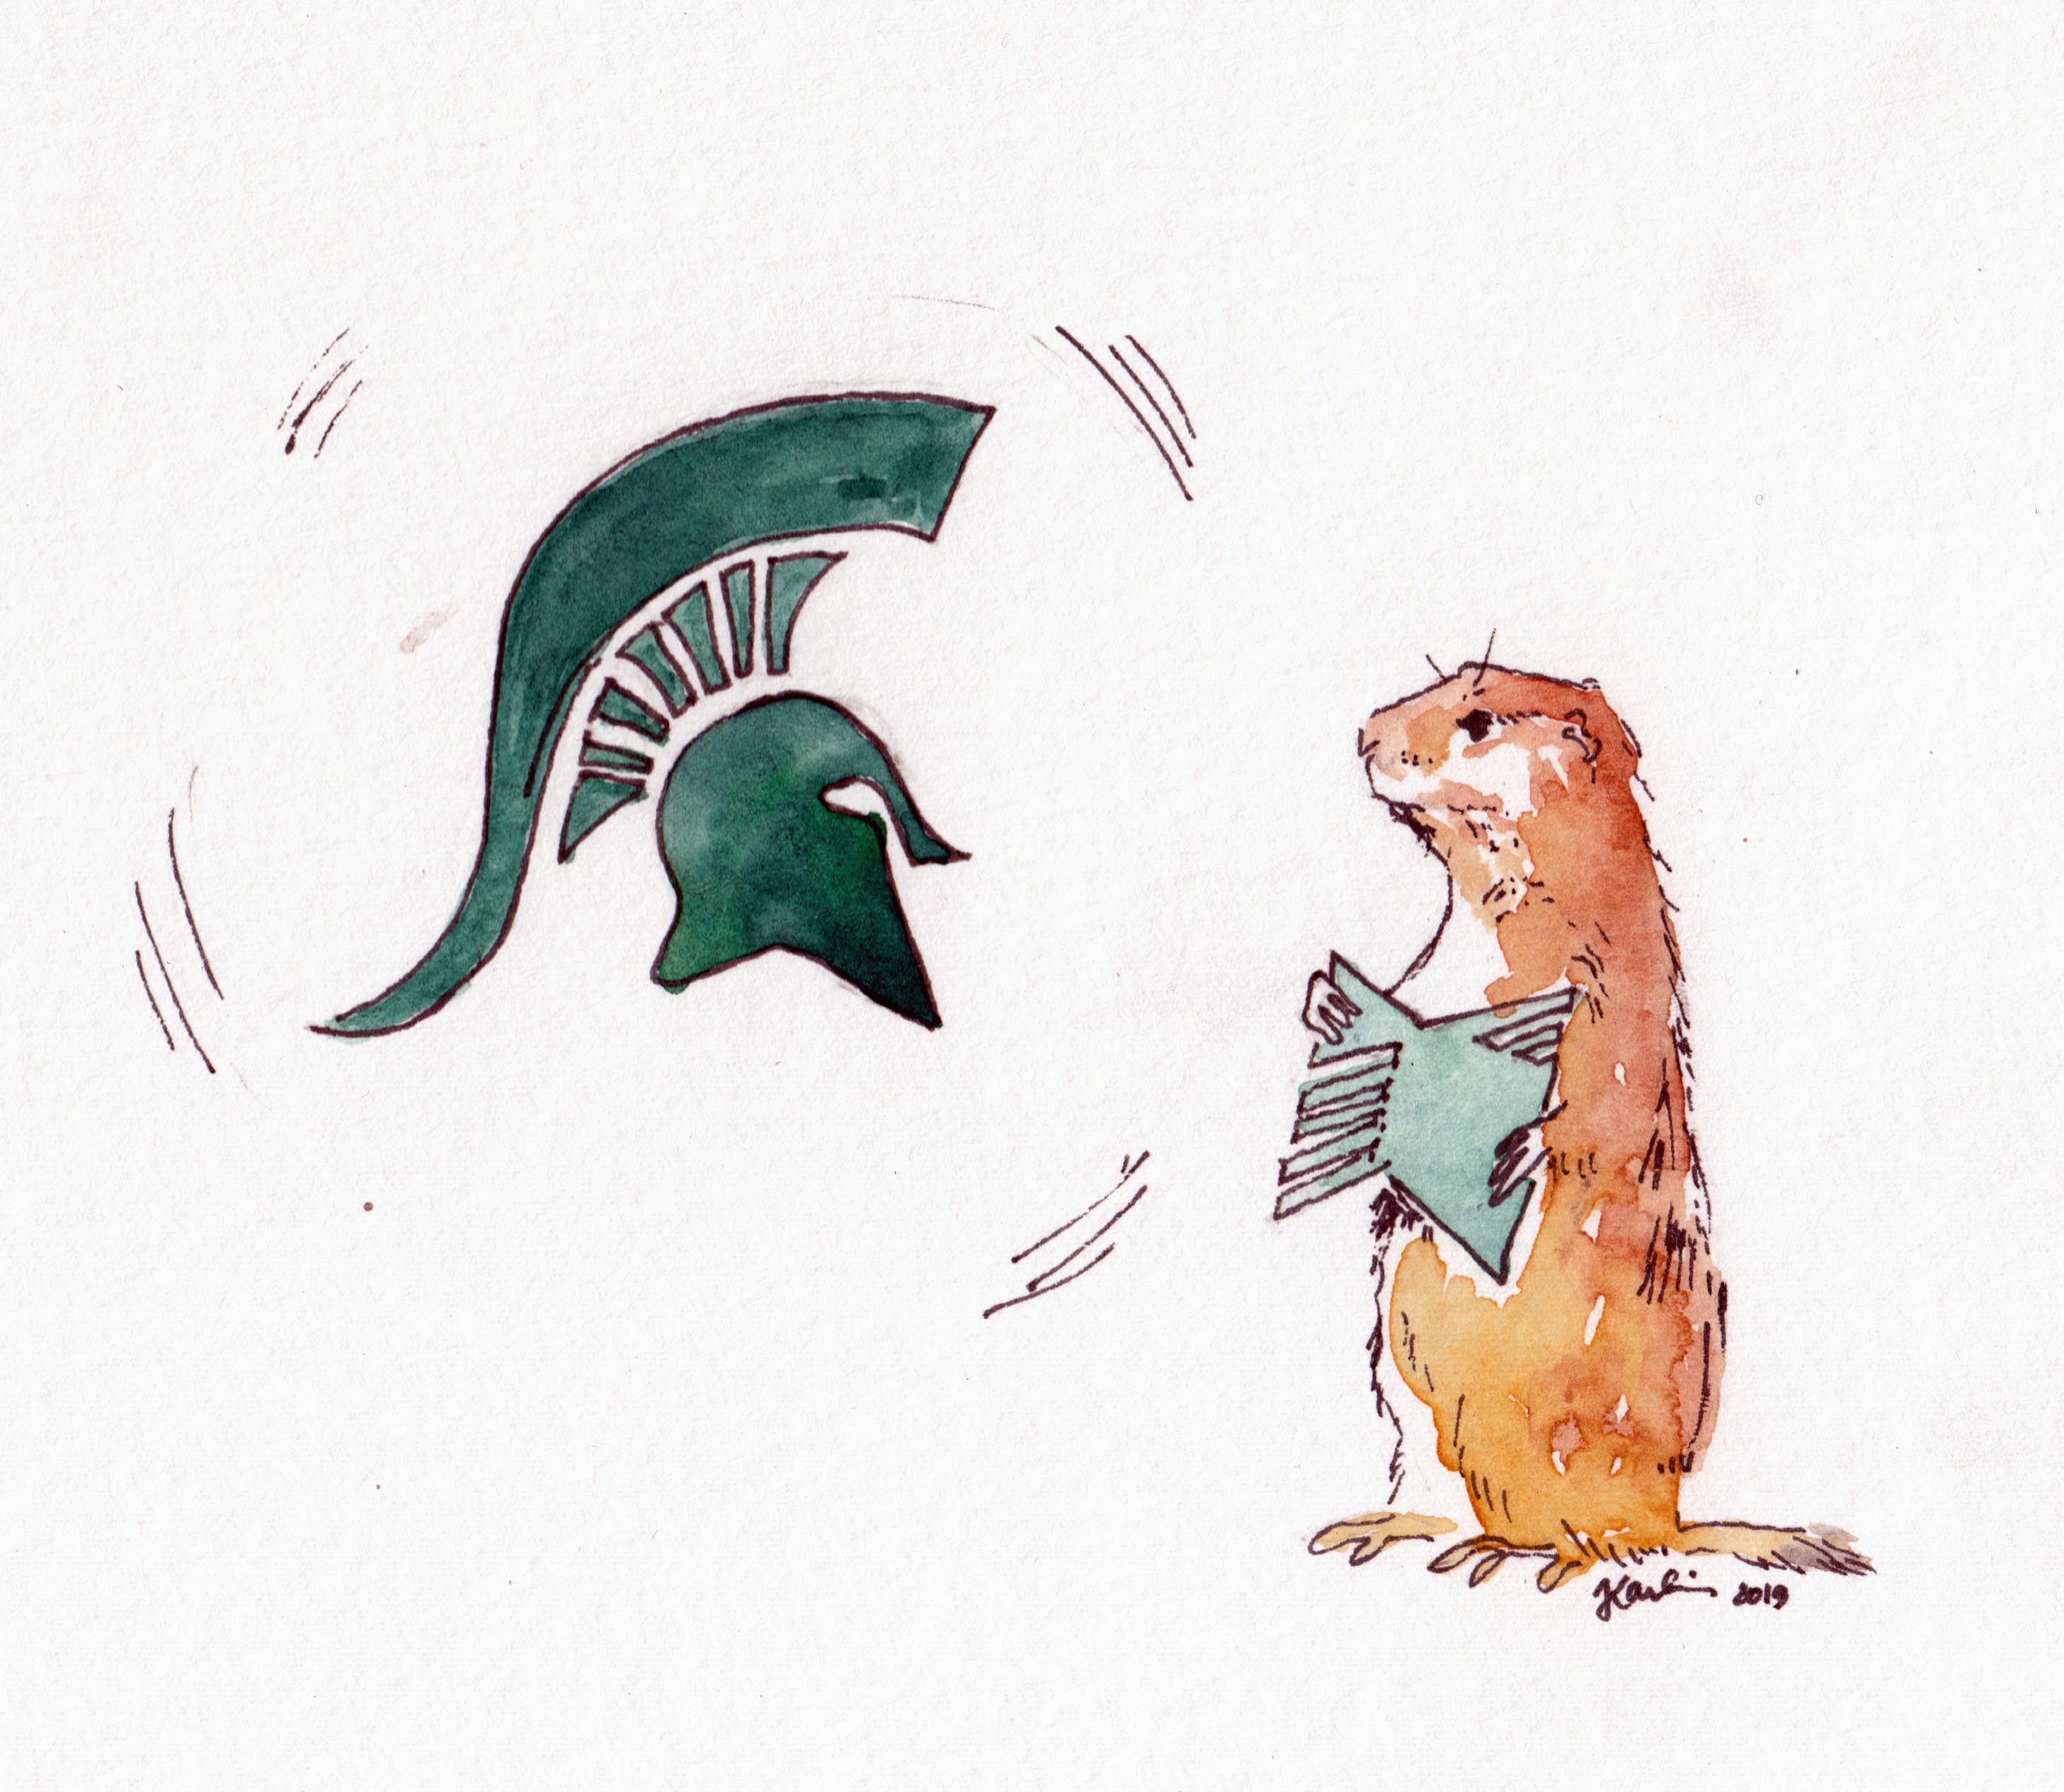 watercolor illustration of a Michigan State University Spartan helmet logo suspended in midair, facing a gopher holding the Manifold logo